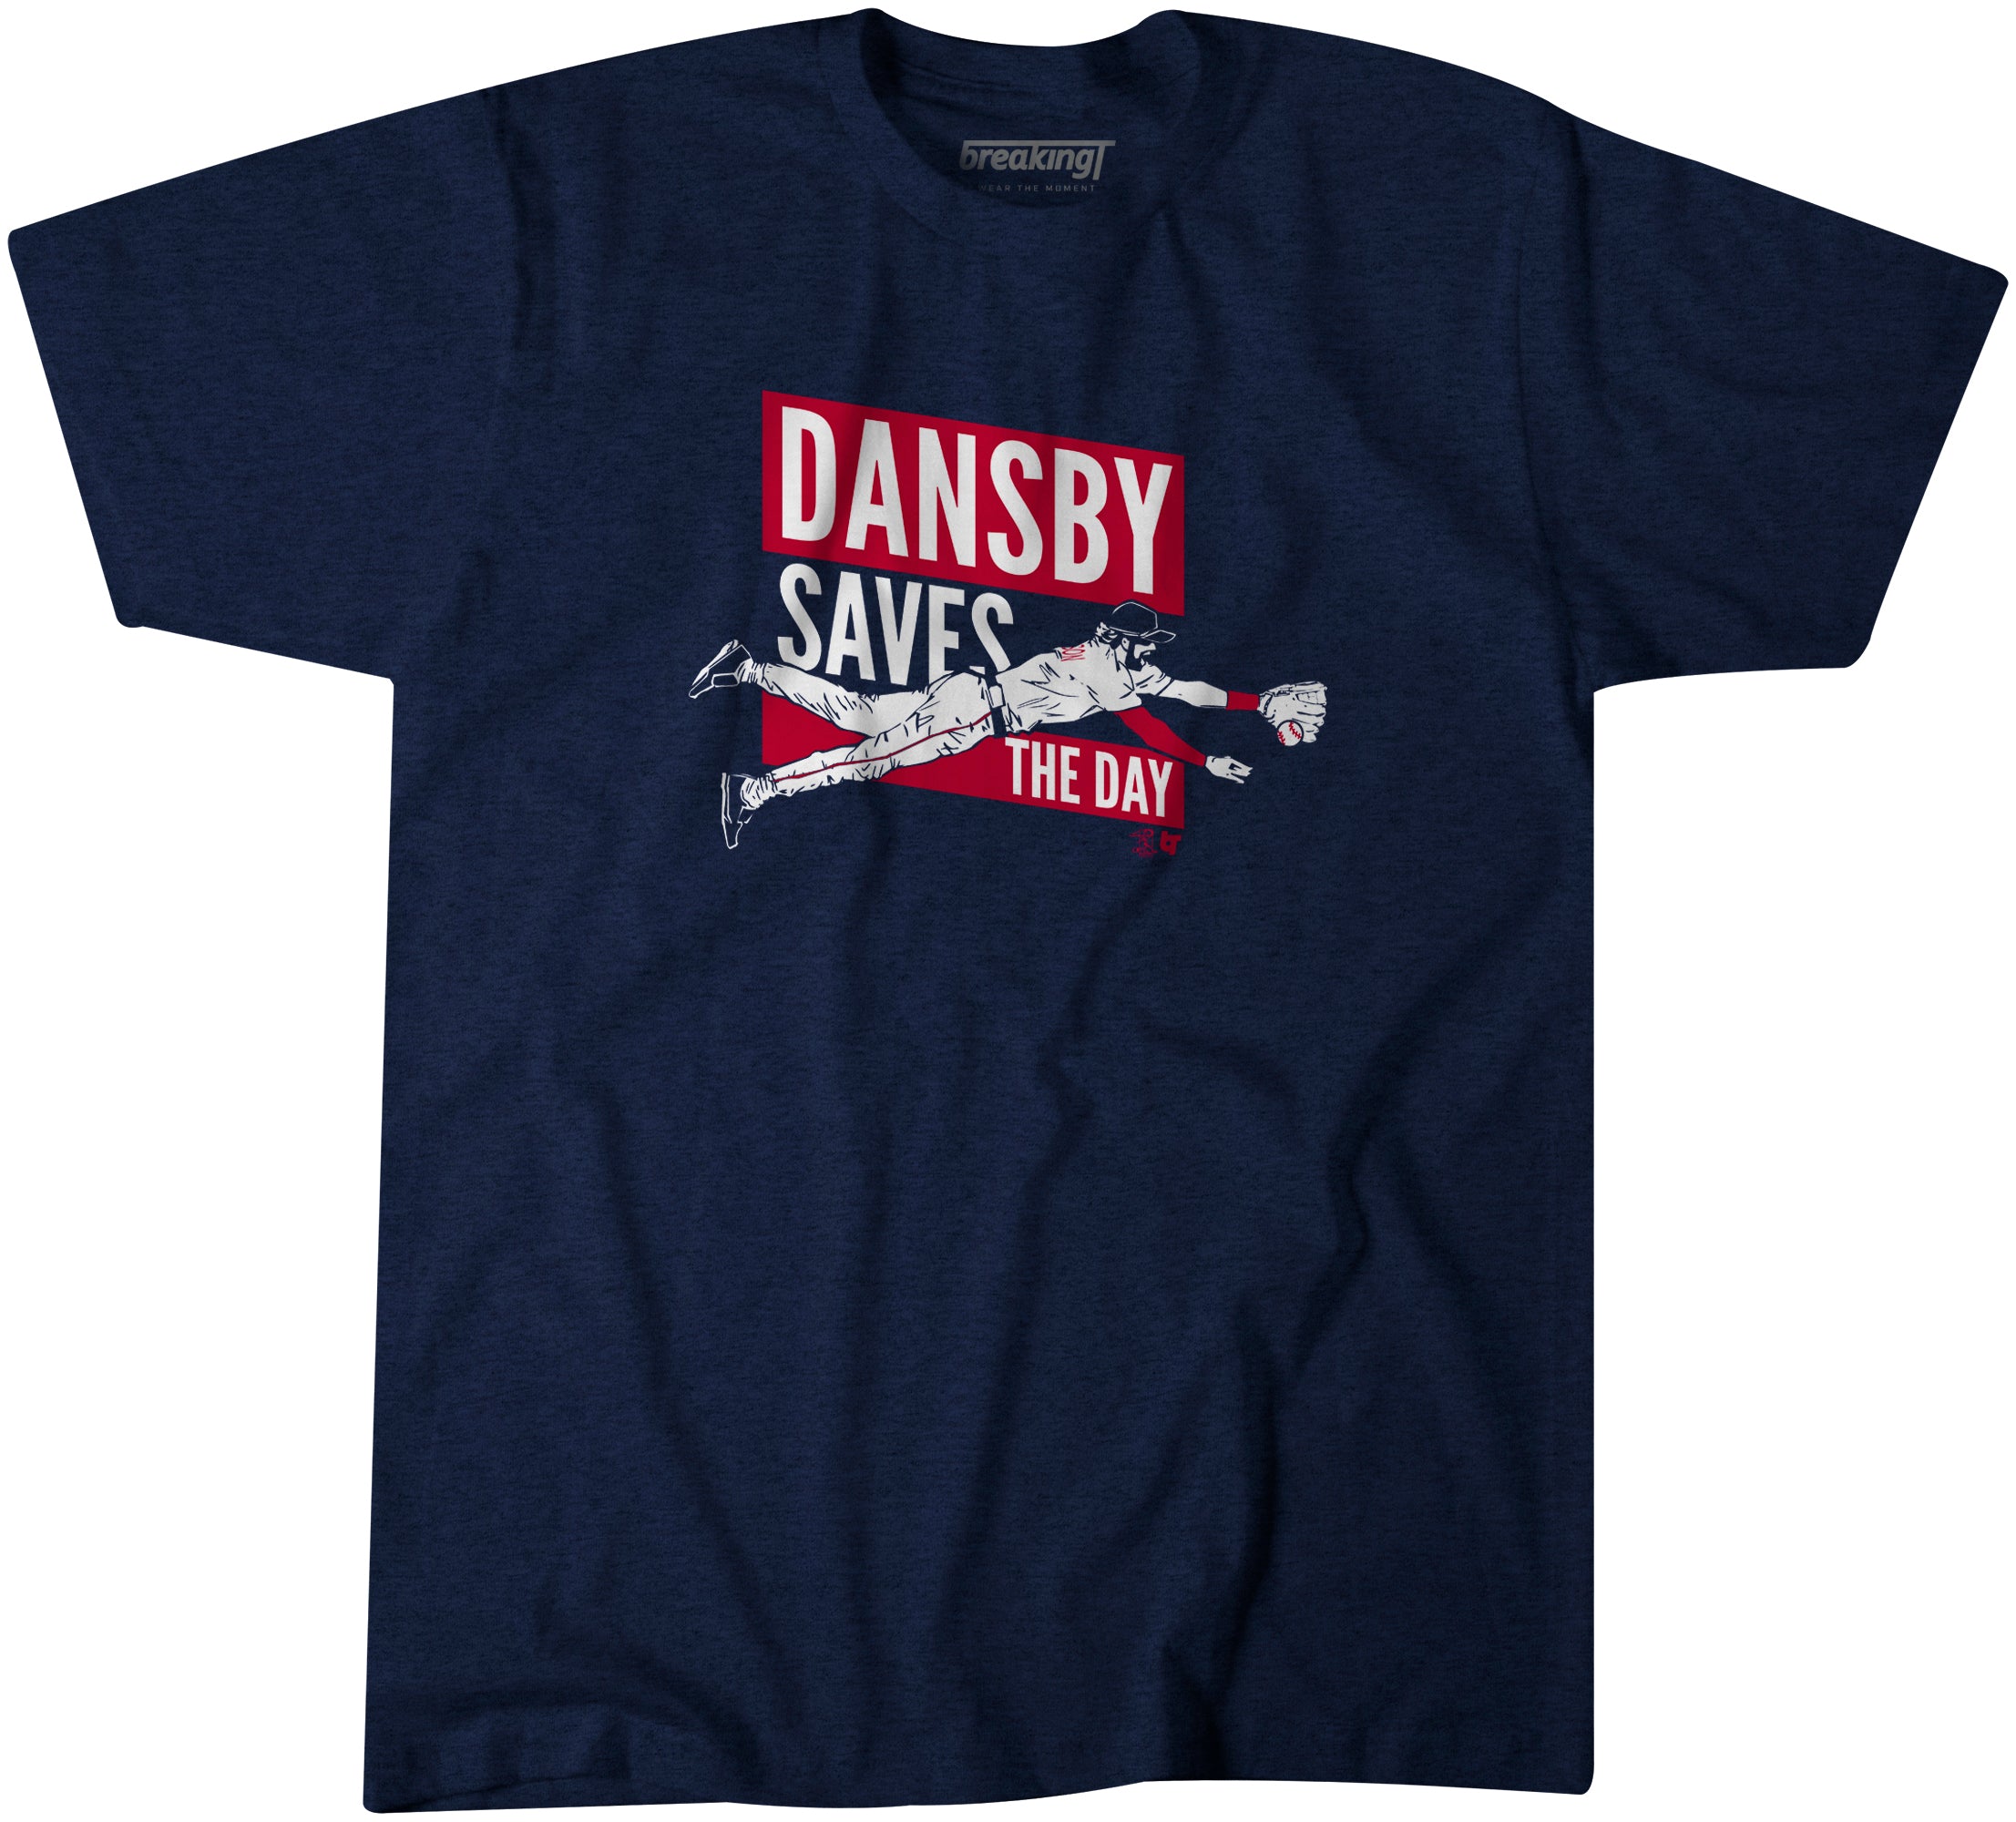  Officially Licensed Dansby Swanson - Dansby Saves The